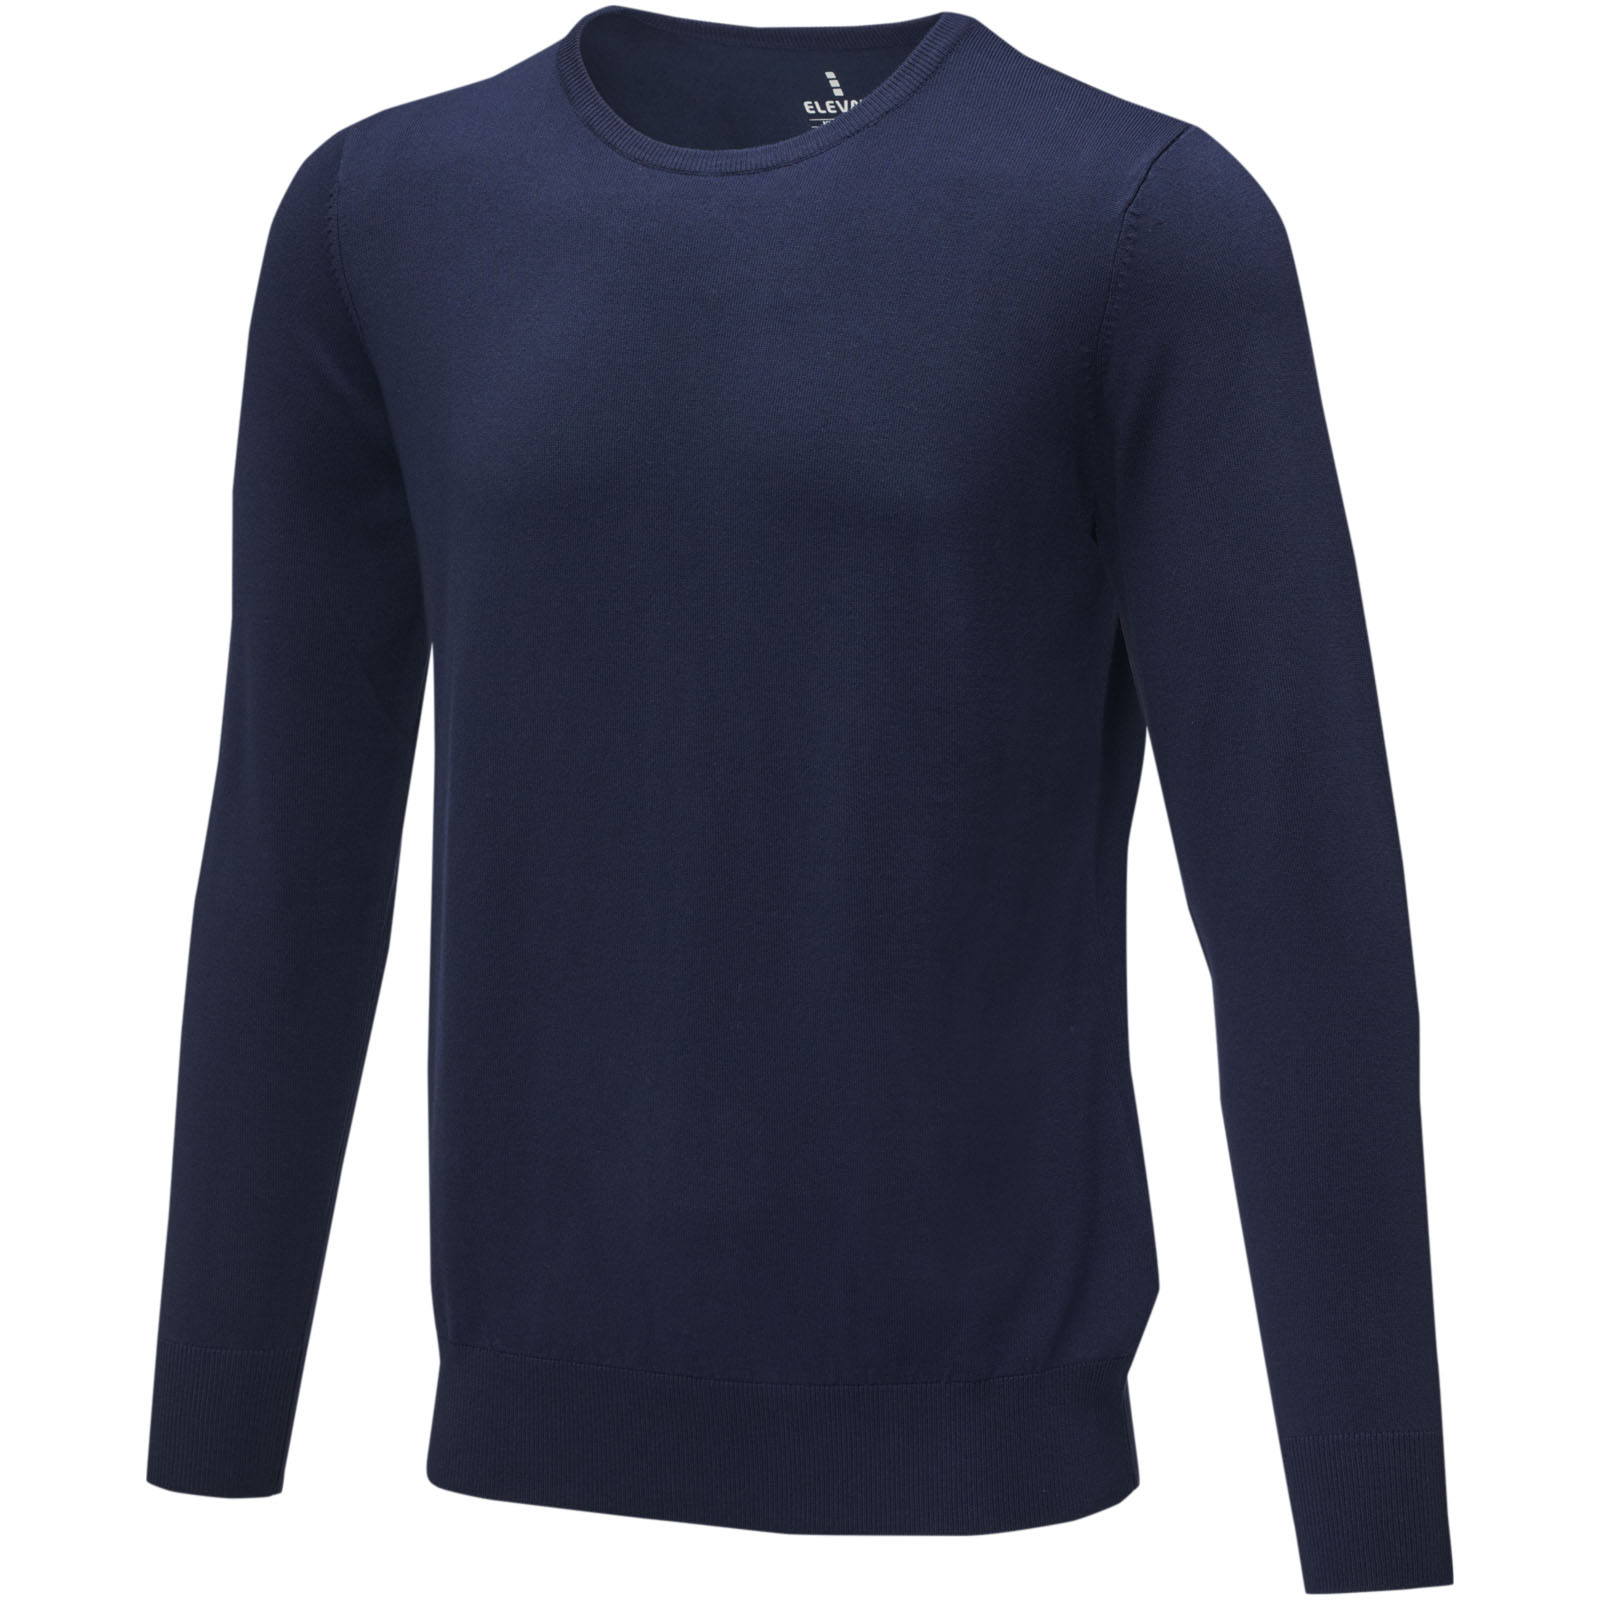 Ribbed Crew Neck Sweatshirt - Bourton-on-the-Water Style - Forres